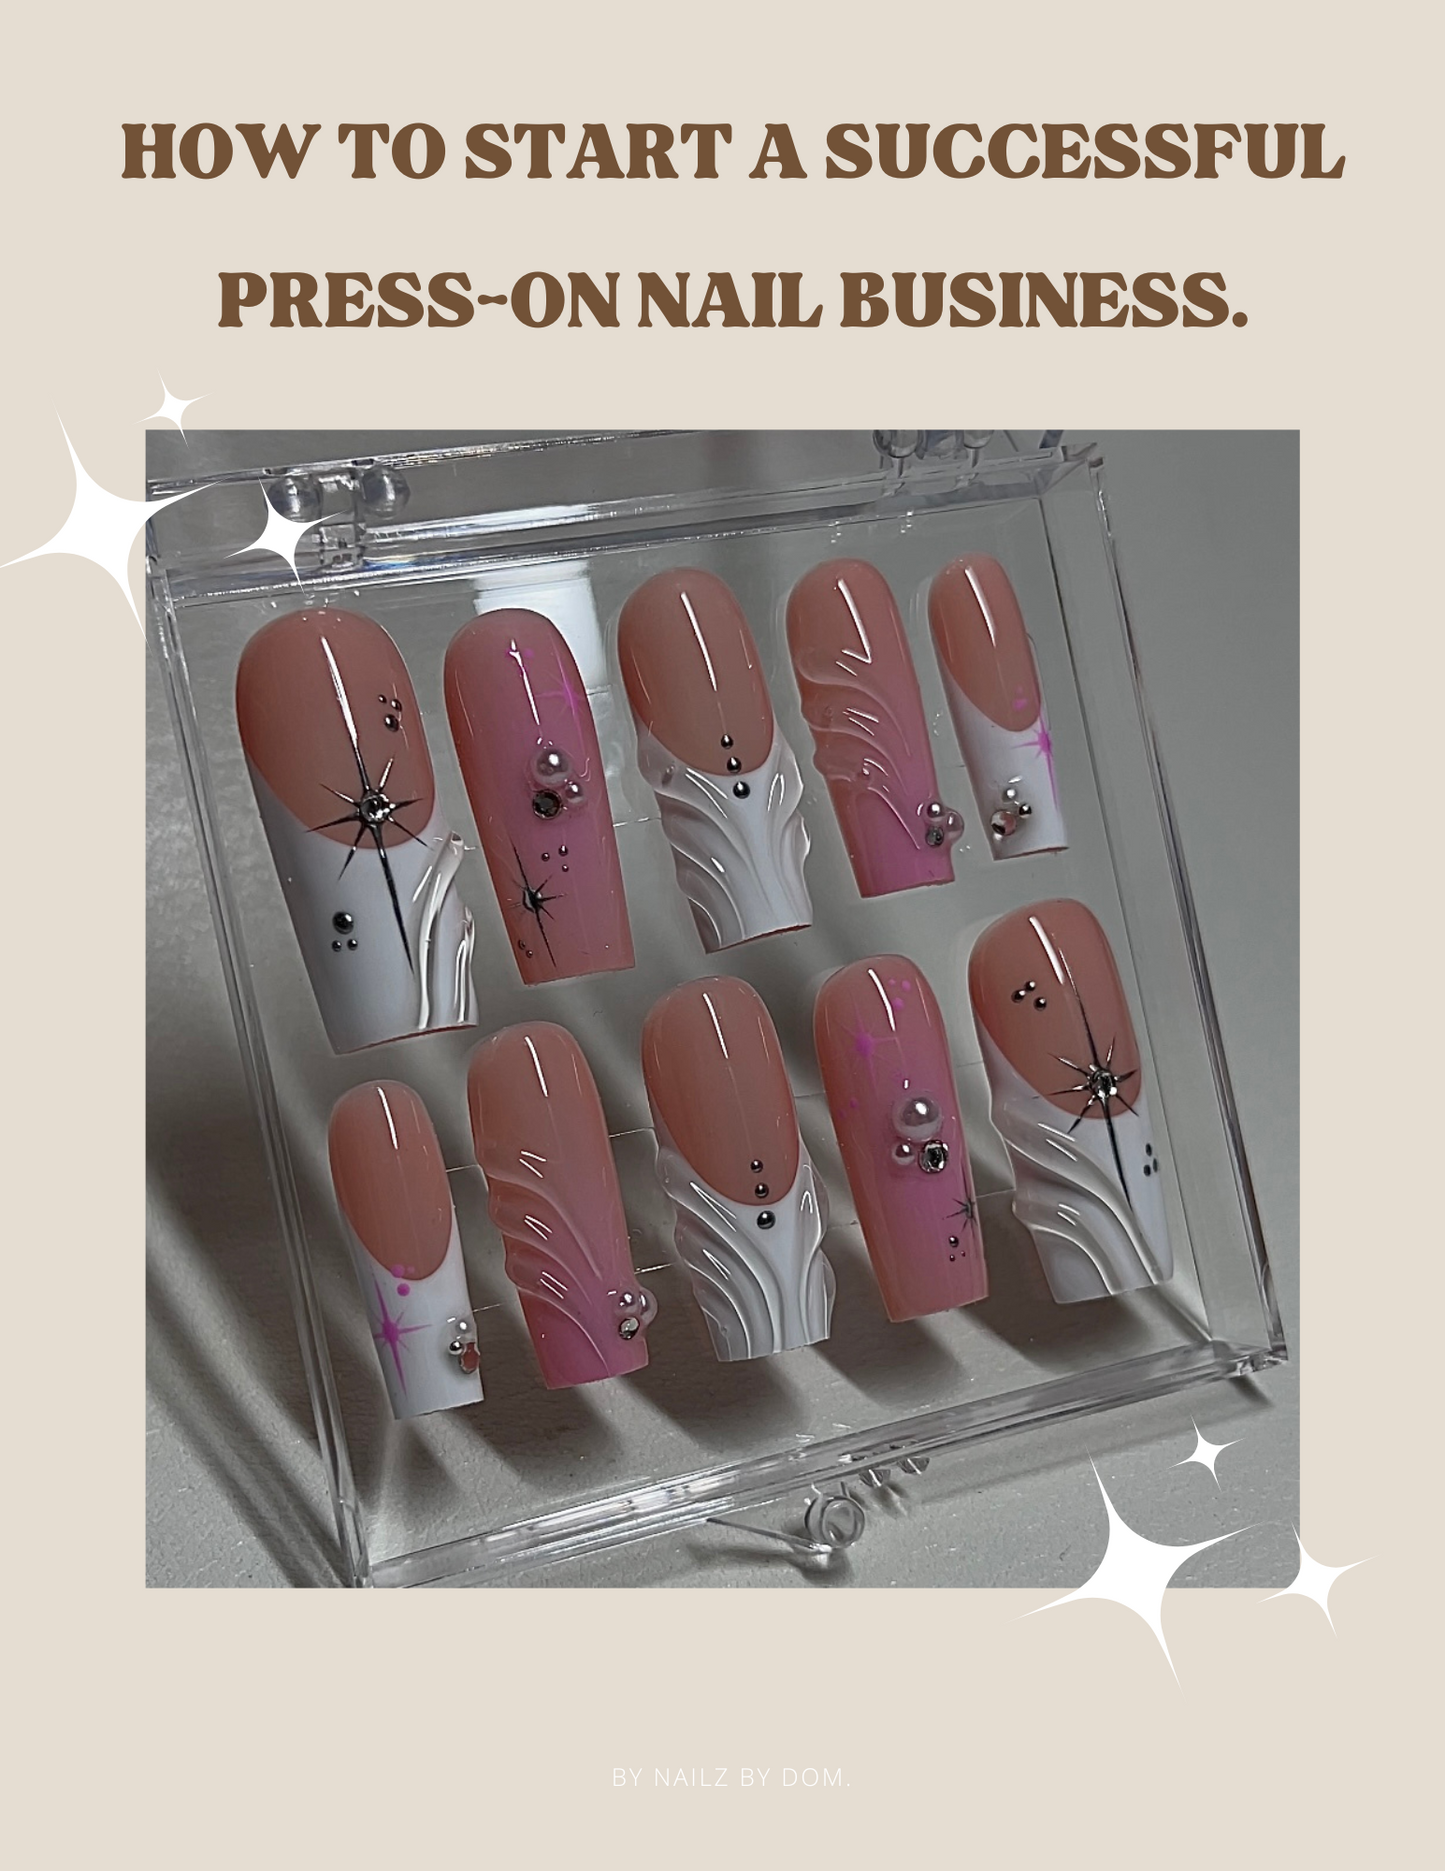 how to start a successful press-on nail business E-book.